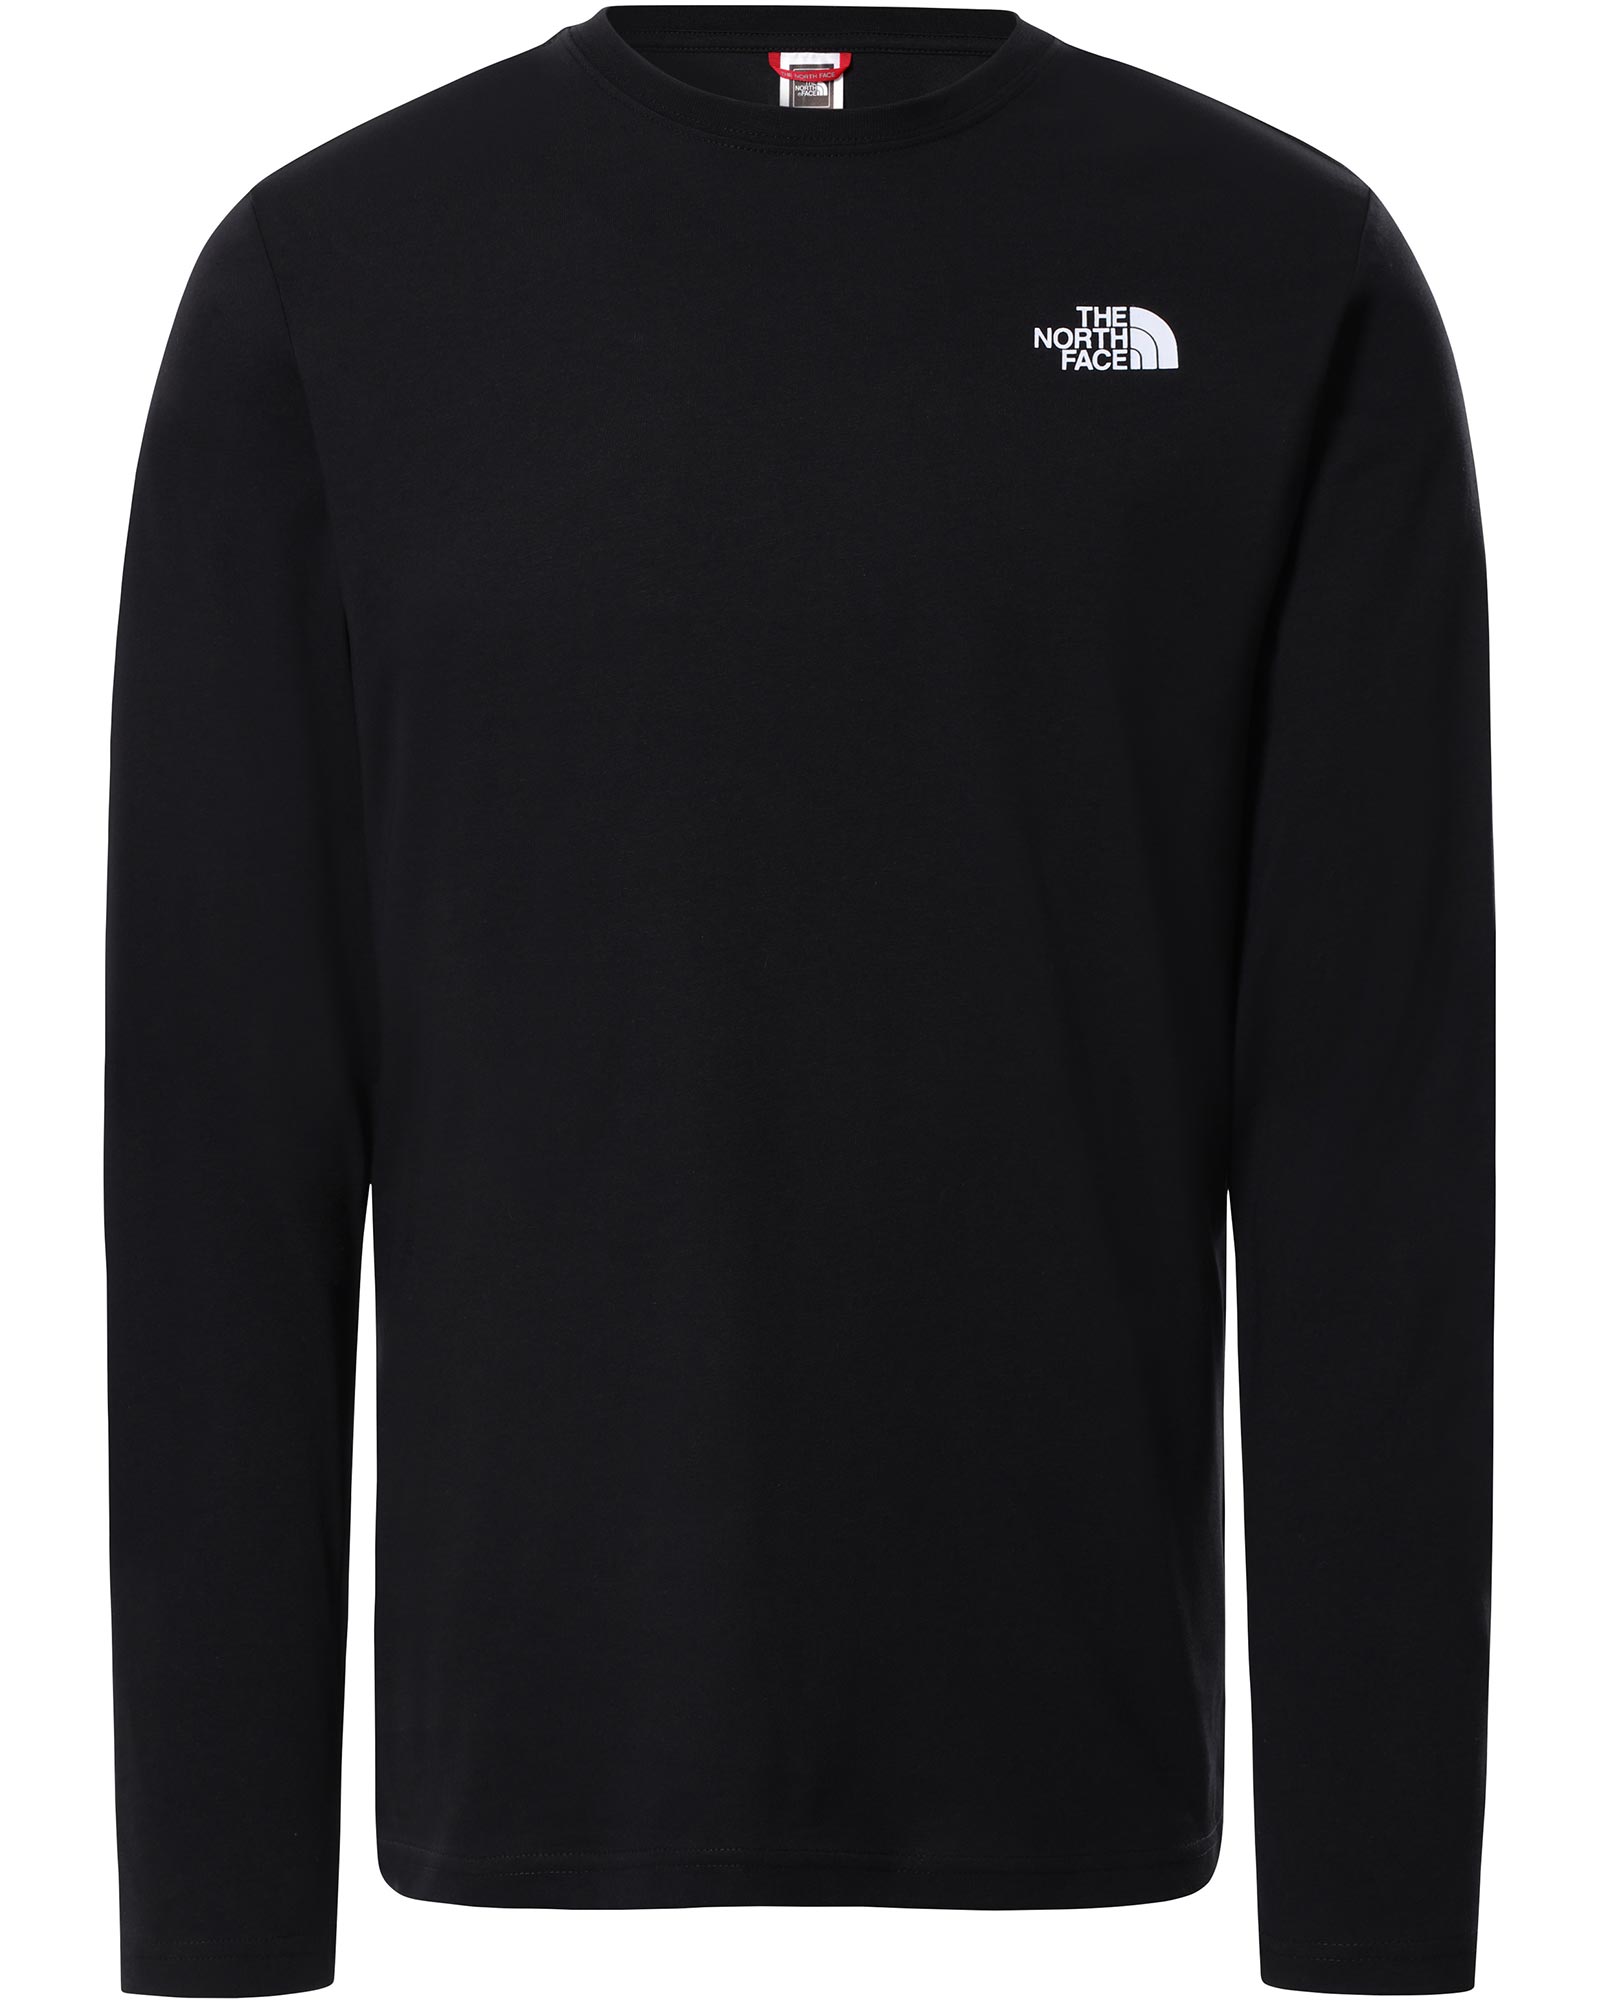 The North Face Red Box Men’s Long Sleeve T Shirt - TNF Black/Thyme Camo S